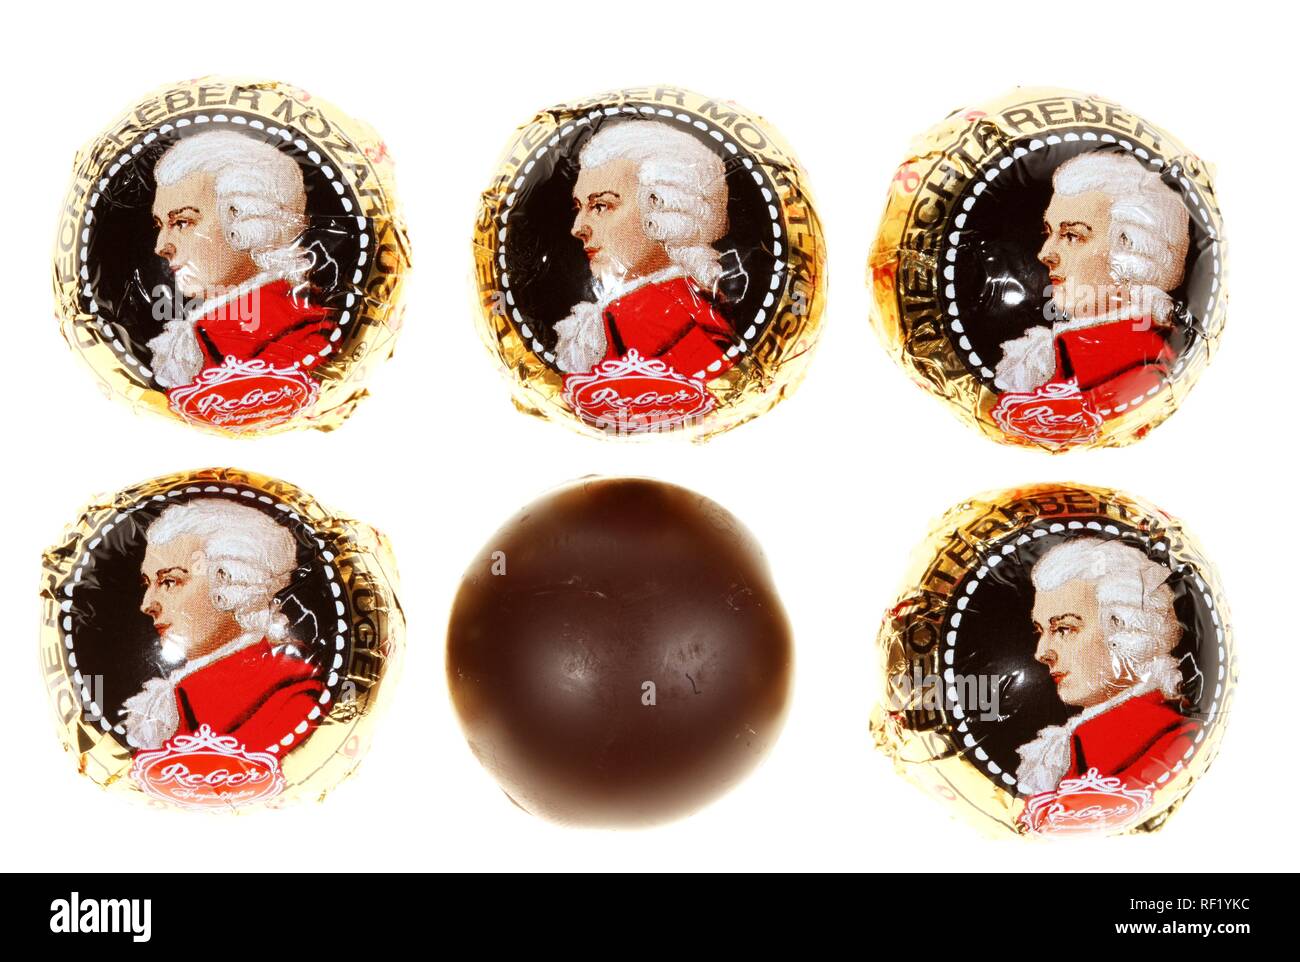 Mozartkugeln, Mozart balls, pralines filled with pistachio marzipan and nougat Stock Photo